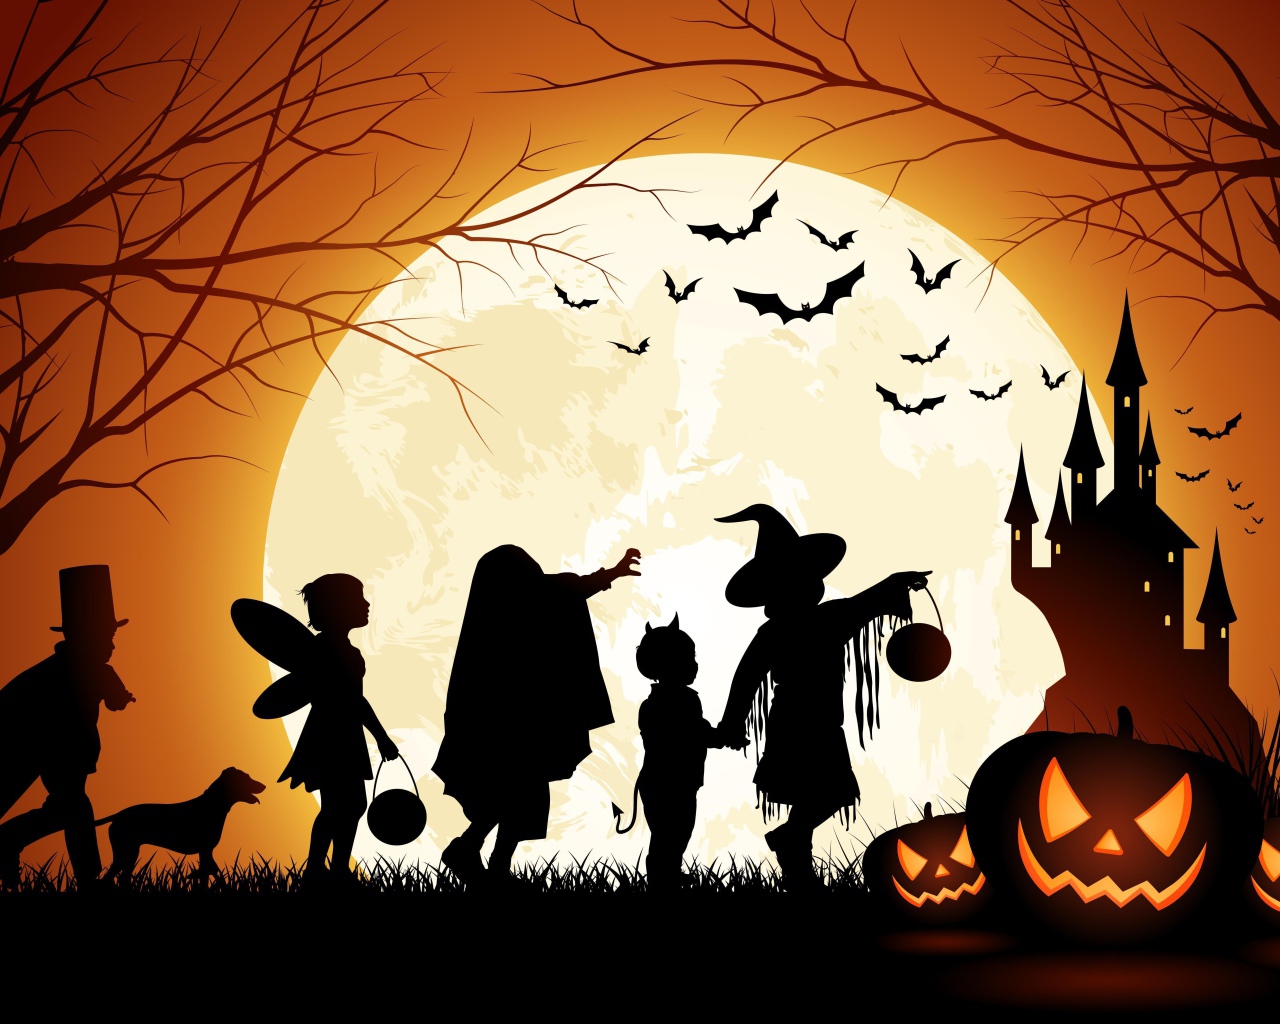 The characters of the celebration of Halloween